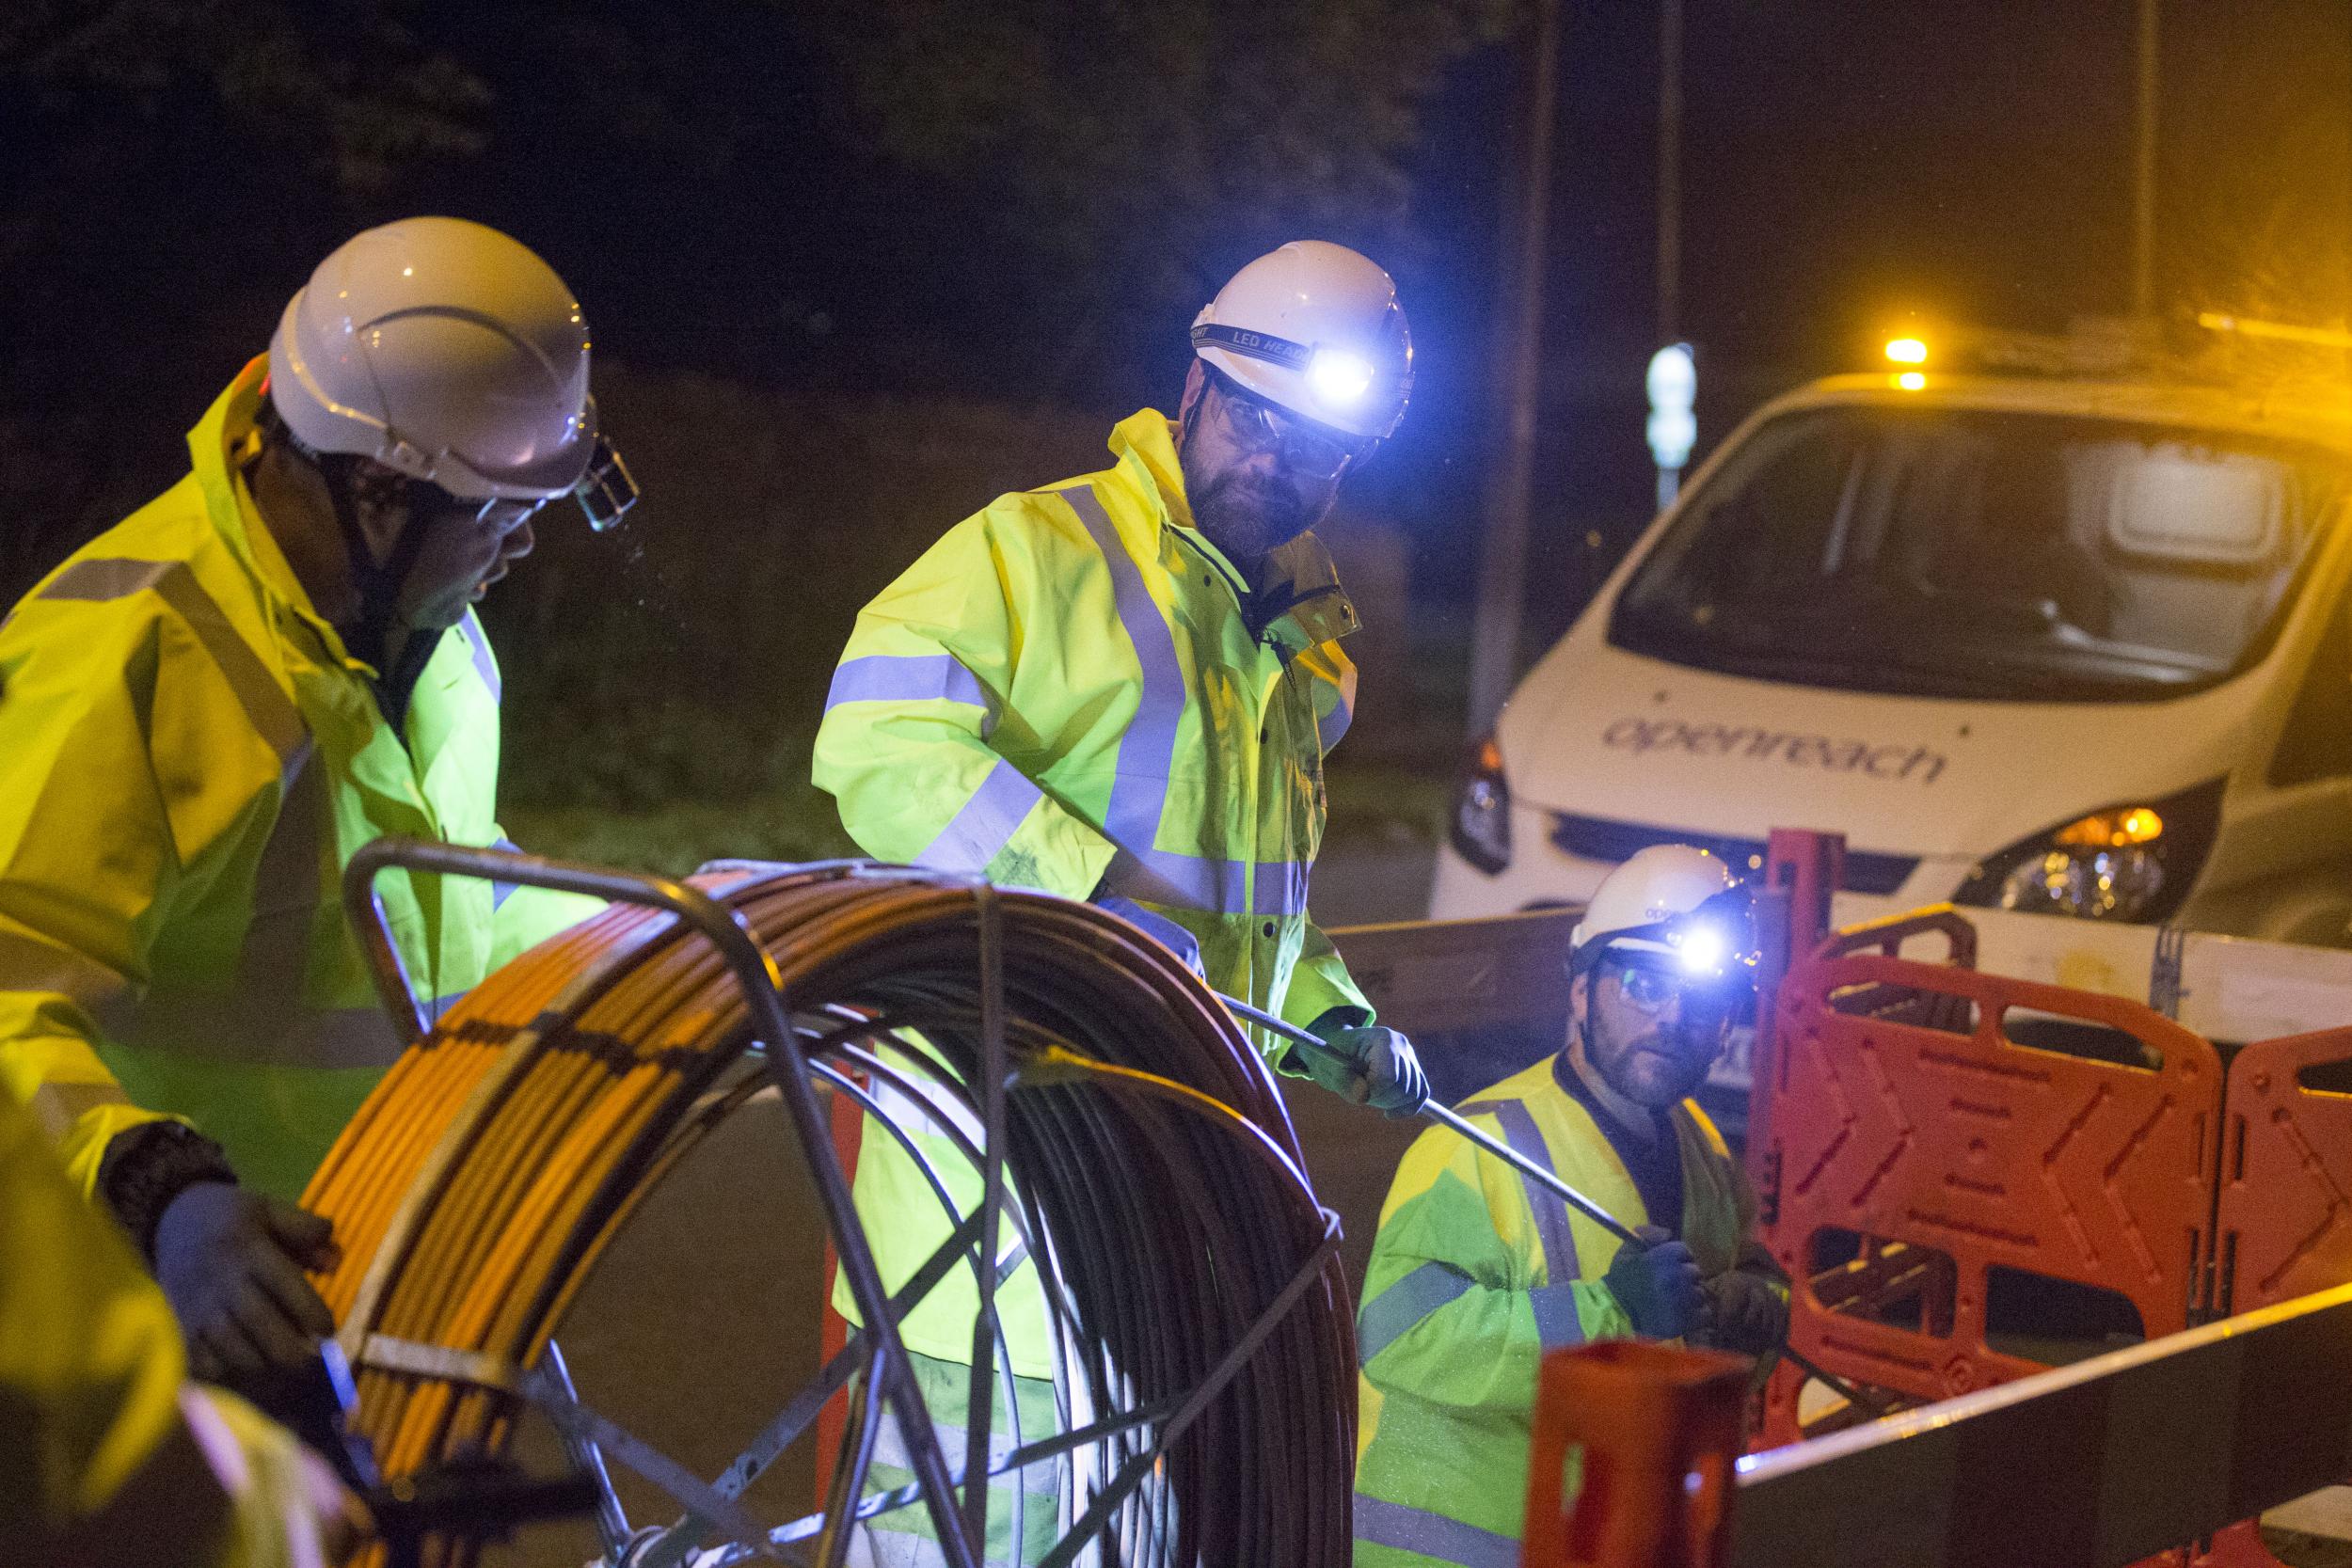 Cabling up under floodlights: BT has promised to speed up fibre broadband connections while maintaining its dividend